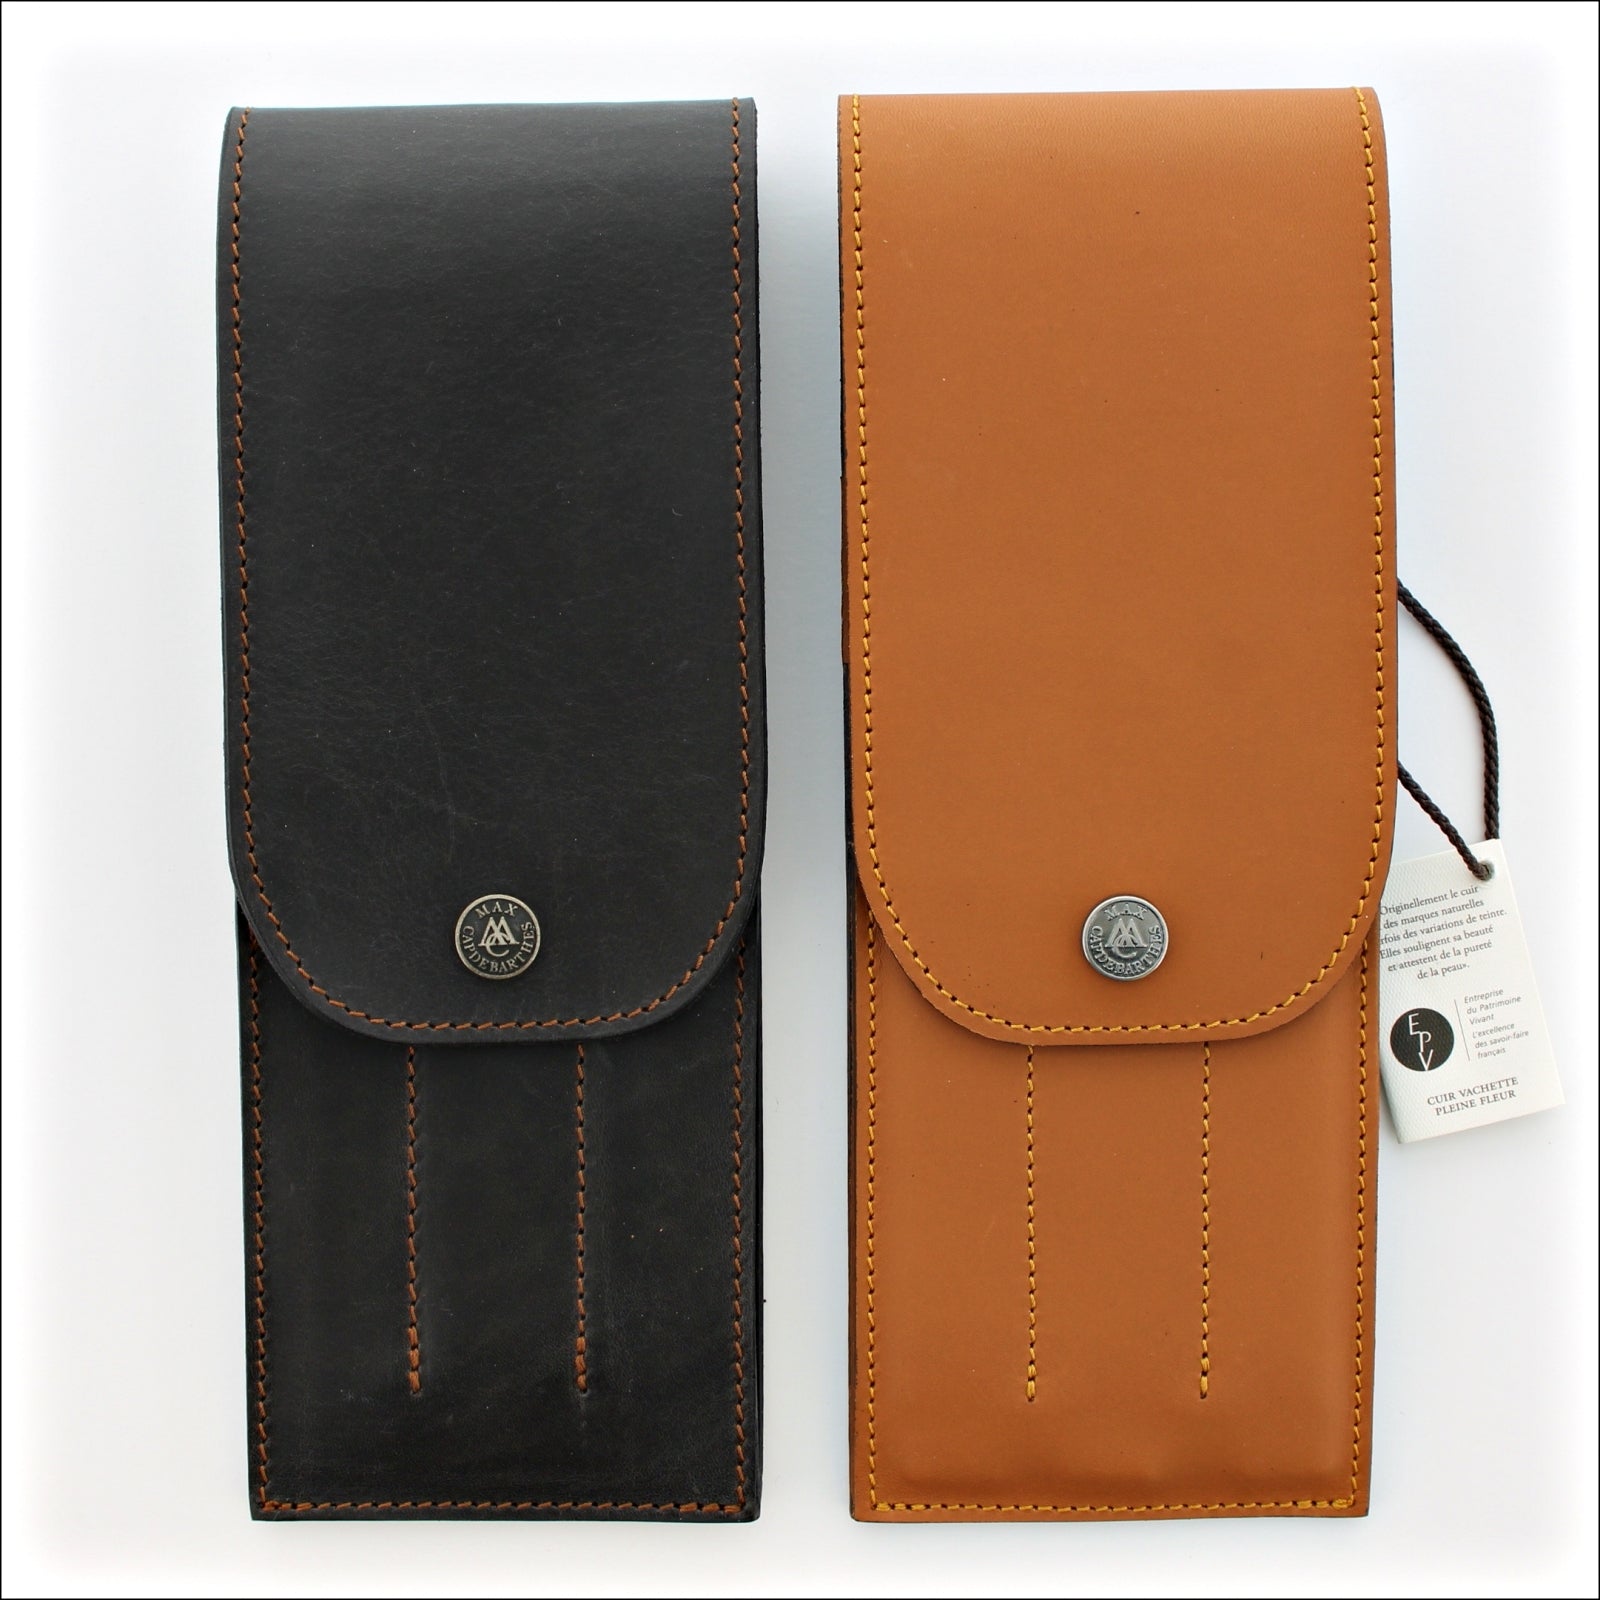 Leather Sheath for 6 Steak Knives